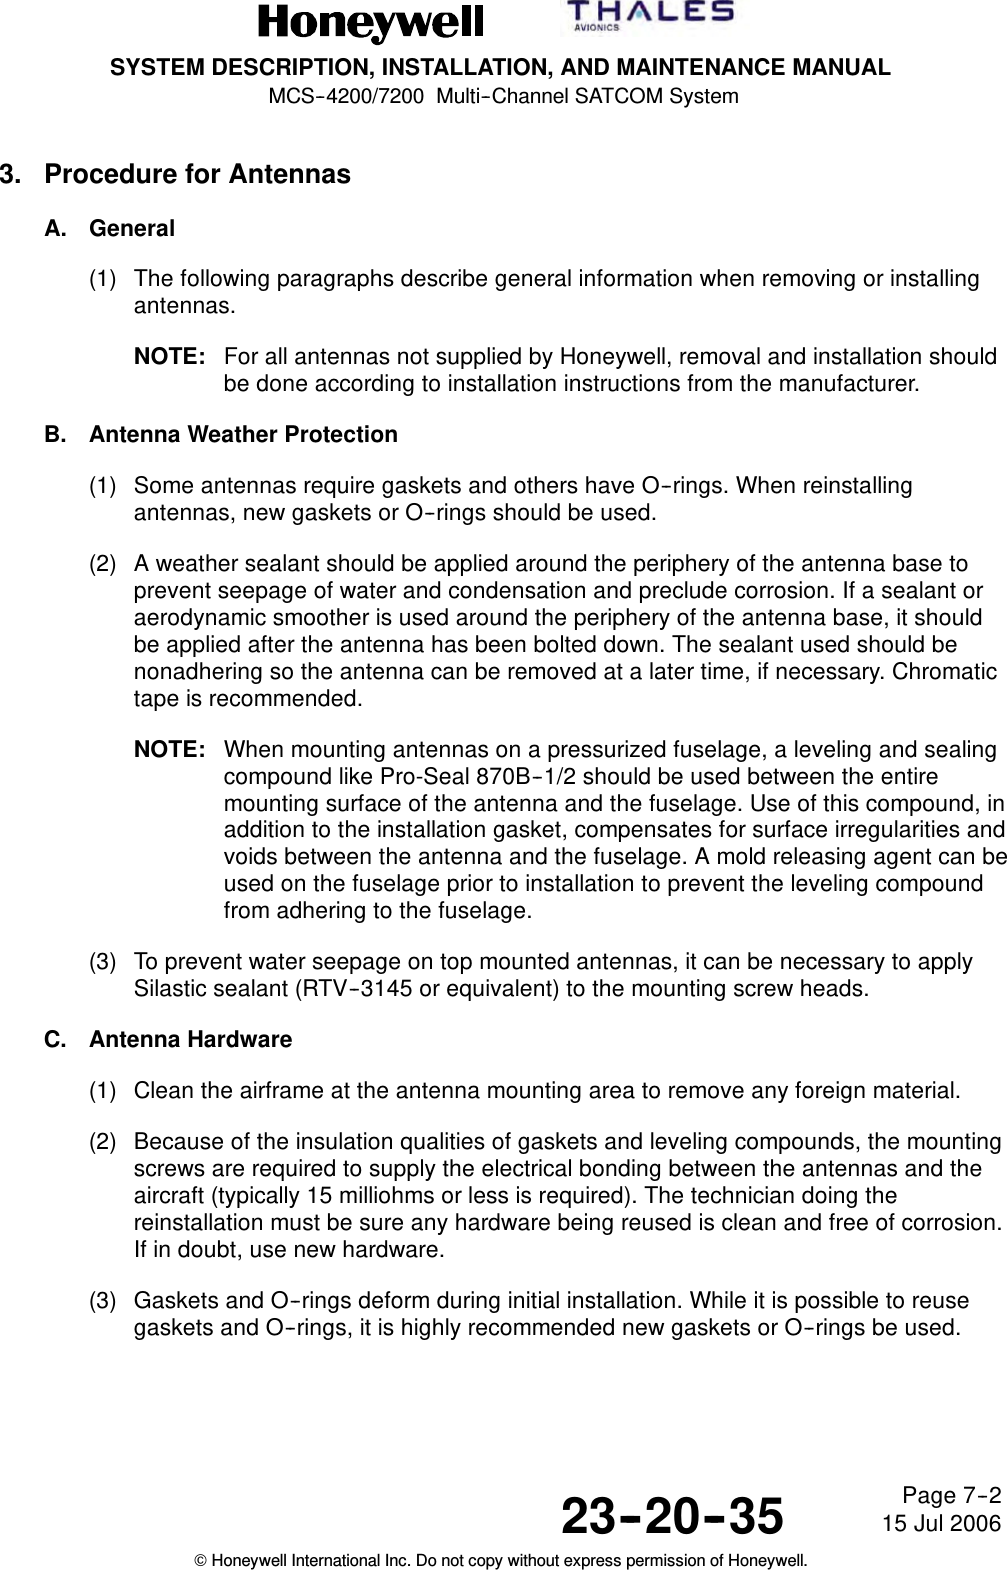 SYSTEM DESCRIPTION, INSTALLATION, AND MAINTENANCE MANUALMCS--4200/7200 Multi--Channel SATCOM System23--20--35 15 Jul 2006Honeywell International Inc. Do not copy without express permission of Honeywell.Page 7--23. Procedure for AntennasA. General(1) The following paragraphs describe general information when removing or installingantennas.NOTE: For all antennas not supplied by Honeywell, removal and installation shouldbe done according to installation instructions from the manufacturer.B. Antenna Weather Protection(1) Some antennas require gaskets and others have O--rings. When reinstallingantennas, new gaskets or O--rings should be used.(2) A weather sealant should be applied around the periphery of the antenna base toprevent seepage of water and condensation and preclude corrosion. If a sealant oraerodynamic smoother is used around the periphery of the antenna base, it shouldbe applied after the antenna has been bolted down. The sealant used should benonadhering so the antenna can be removed at a later time, if necessary. Chromatictape is recommended.NOTE: When mounting antennas on a pressurized fuselage, a leveling and sealingcompound like Pro-Seal 870B--1/2 should be used between the entiremounting surface of the antenna and the fuselage. Use of this compound, inaddition to the installation gasket, compensates for surface irregularities andvoids between the antenna and the fuselage. A mold releasing agent can beused on the fuselage prior to installation to prevent the leveling compoundfrom adhering to the fuselage.(3) To prevent water seepage on top mounted antennas, it can be necessary to applySilastic sealant (RTV--3145 or equivalent) to the mounting screw heads.C. Antenna Hardware(1) Clean the airframe at the antenna mounting area to remove any foreign material.(2) Because of the insulation qualities of gaskets and leveling compounds, the mountingscrews are required to supply the electrical bonding between the antennas and theaircraft (typically 15 milliohms or less is required). The technician doing thereinstallation must be sure any hardware being reused is clean and free of corrosion.If in doubt, use new hardware.(3) Gaskets and O--rings deform during initial installation. While it is possible to reusegaskets and O--rings, it is highly recommended new gaskets or O--rings be used.